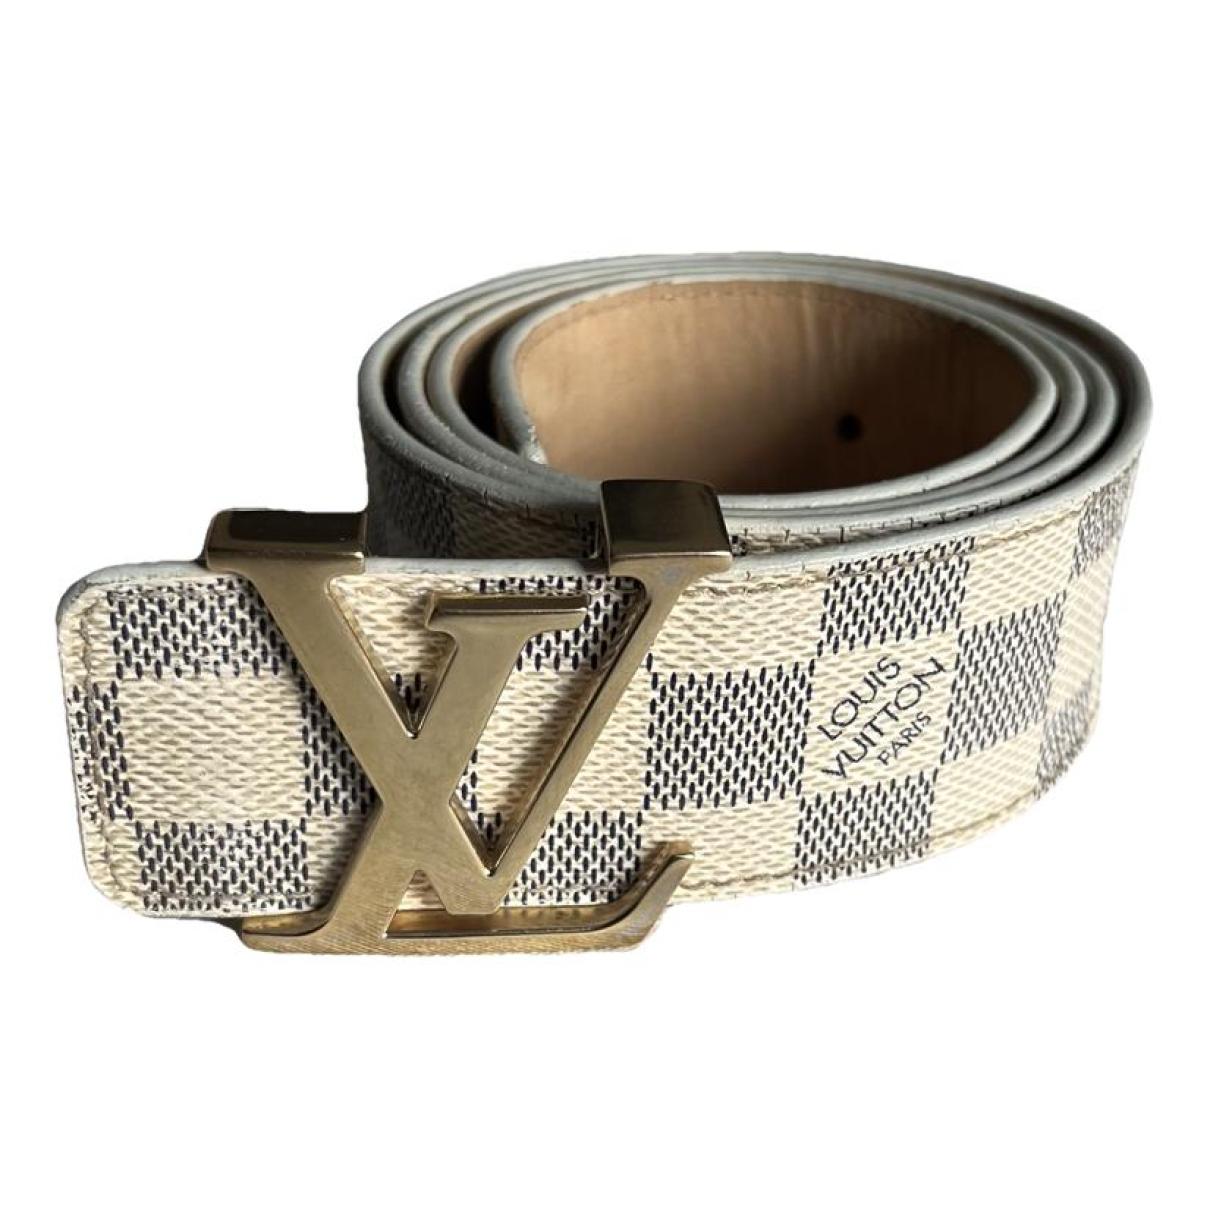 Initiales cloth belt Louis Vuitton White size 37 Inches in Cloth - 21687718